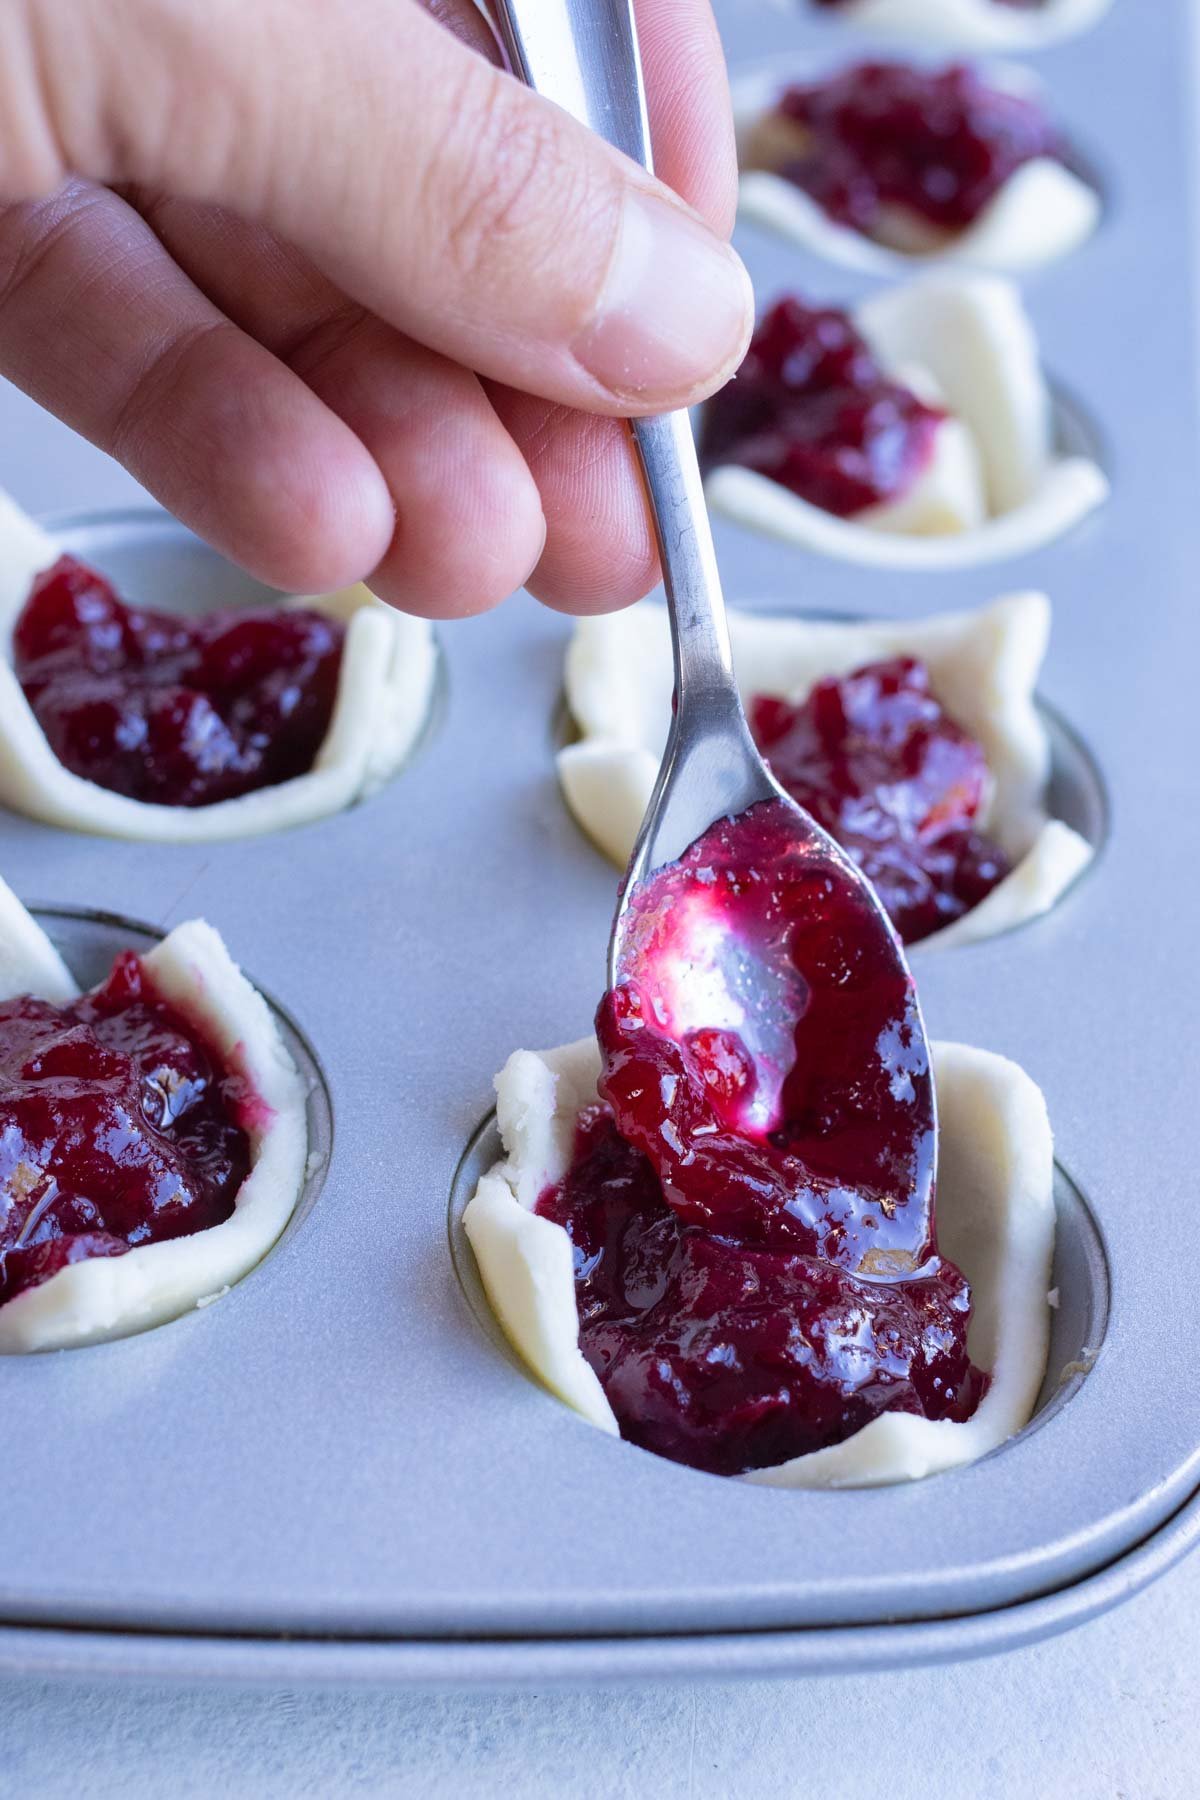 Homemade cranberry sauce is added to the puff pastry bites.